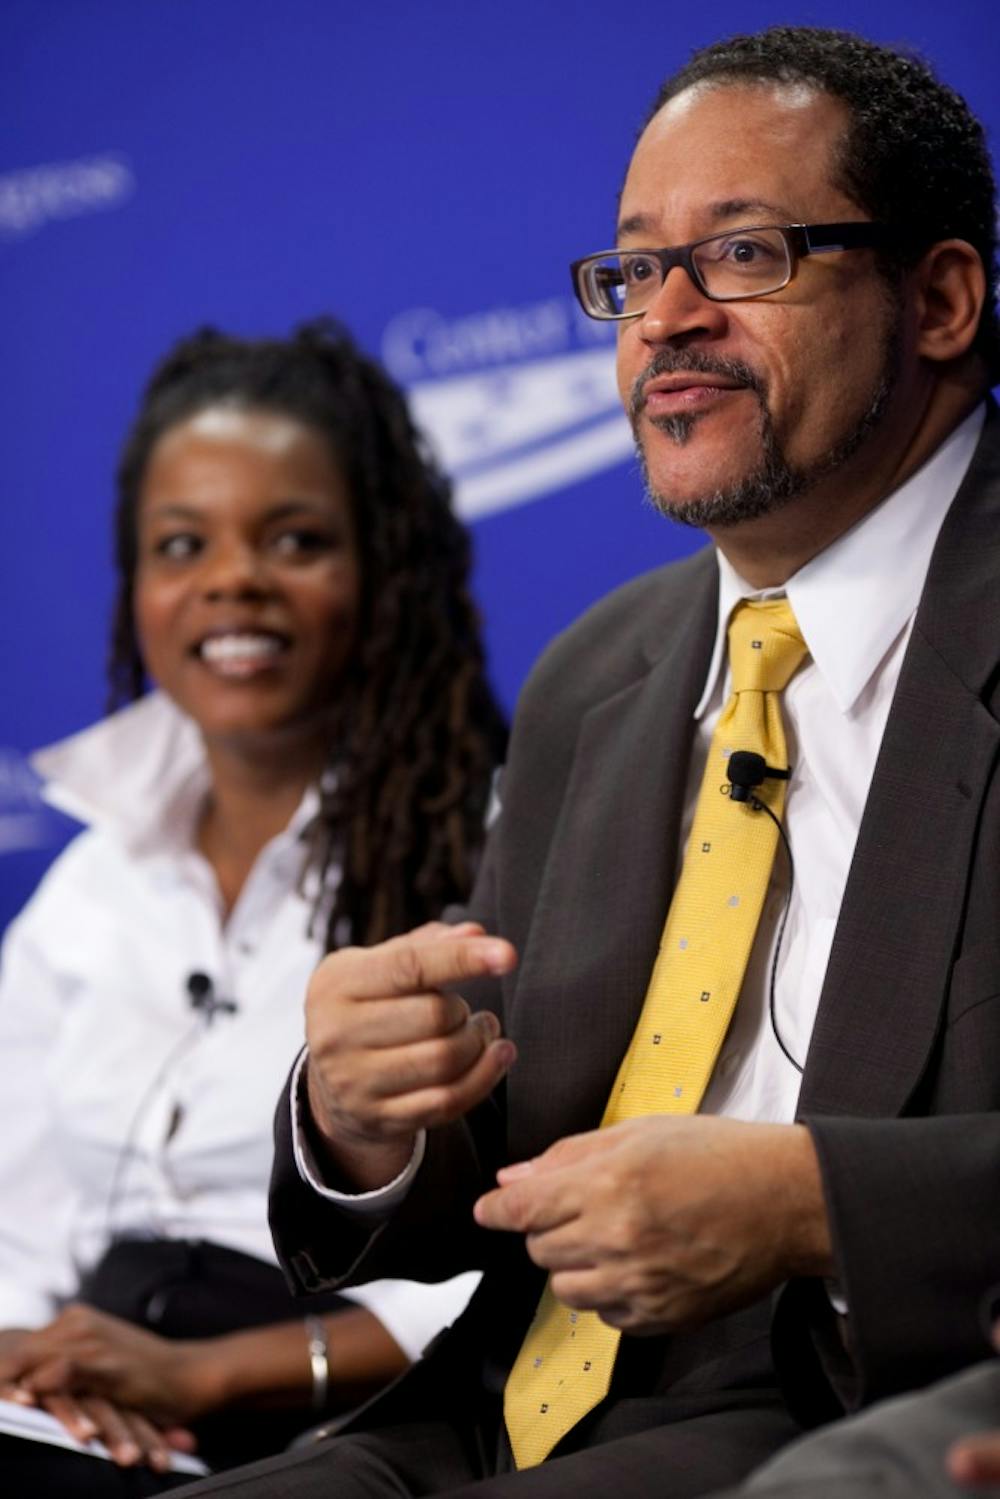 Dr. Michael Eric Dyson to speak at Ball State